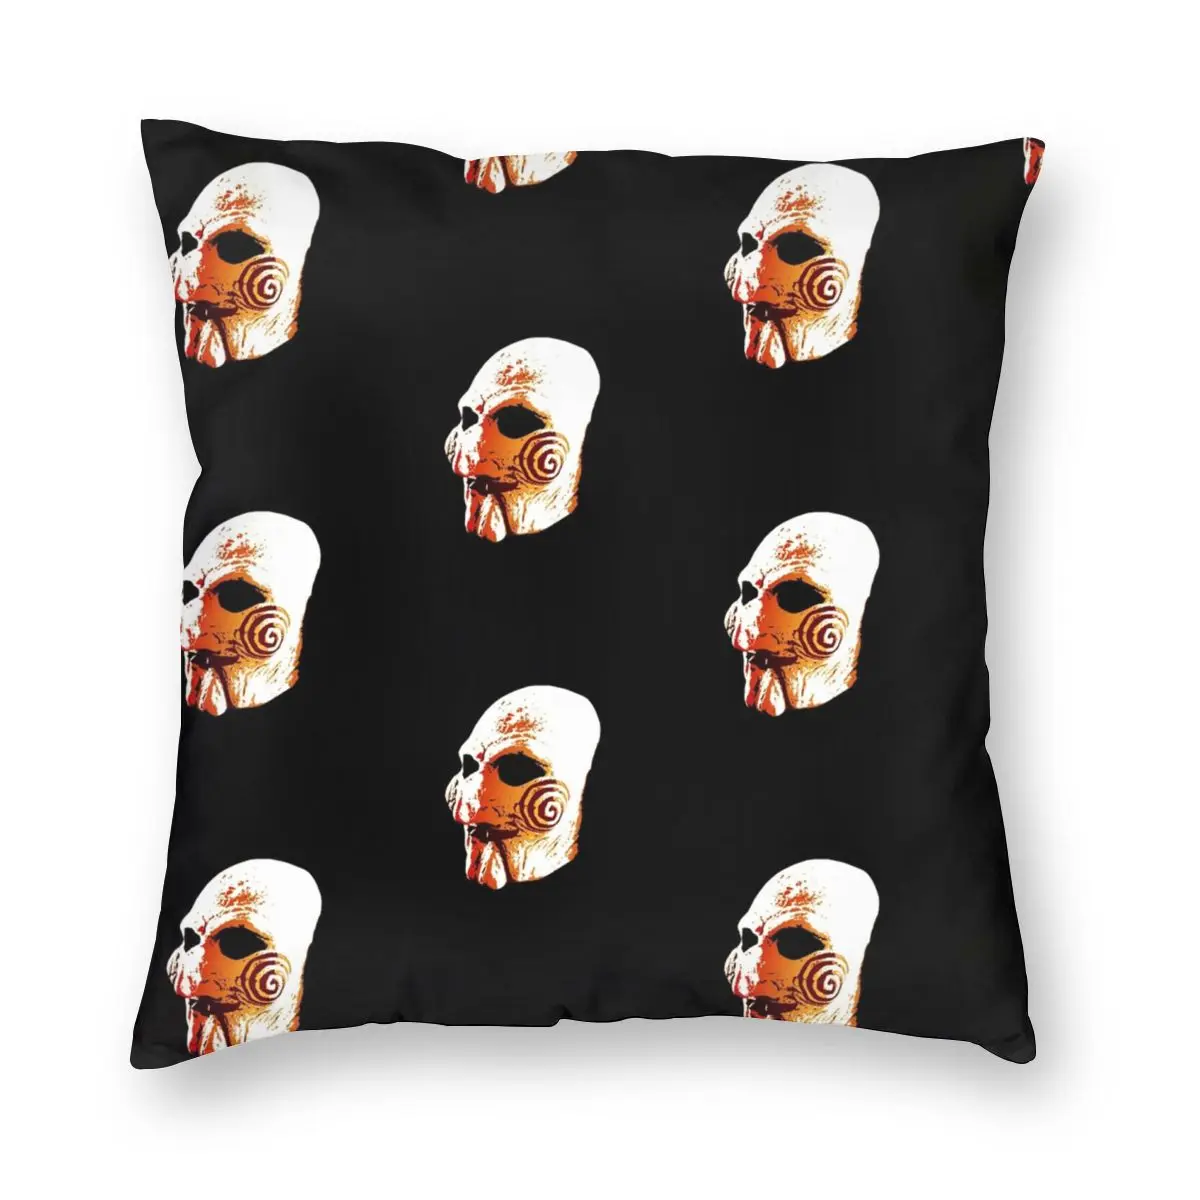 

Billy The Puppet Saw Pillowcase Soft Polyester Cushion Cover Decorations Horror Movie Jigsaw Pillow Case Cover Home 45*45cm